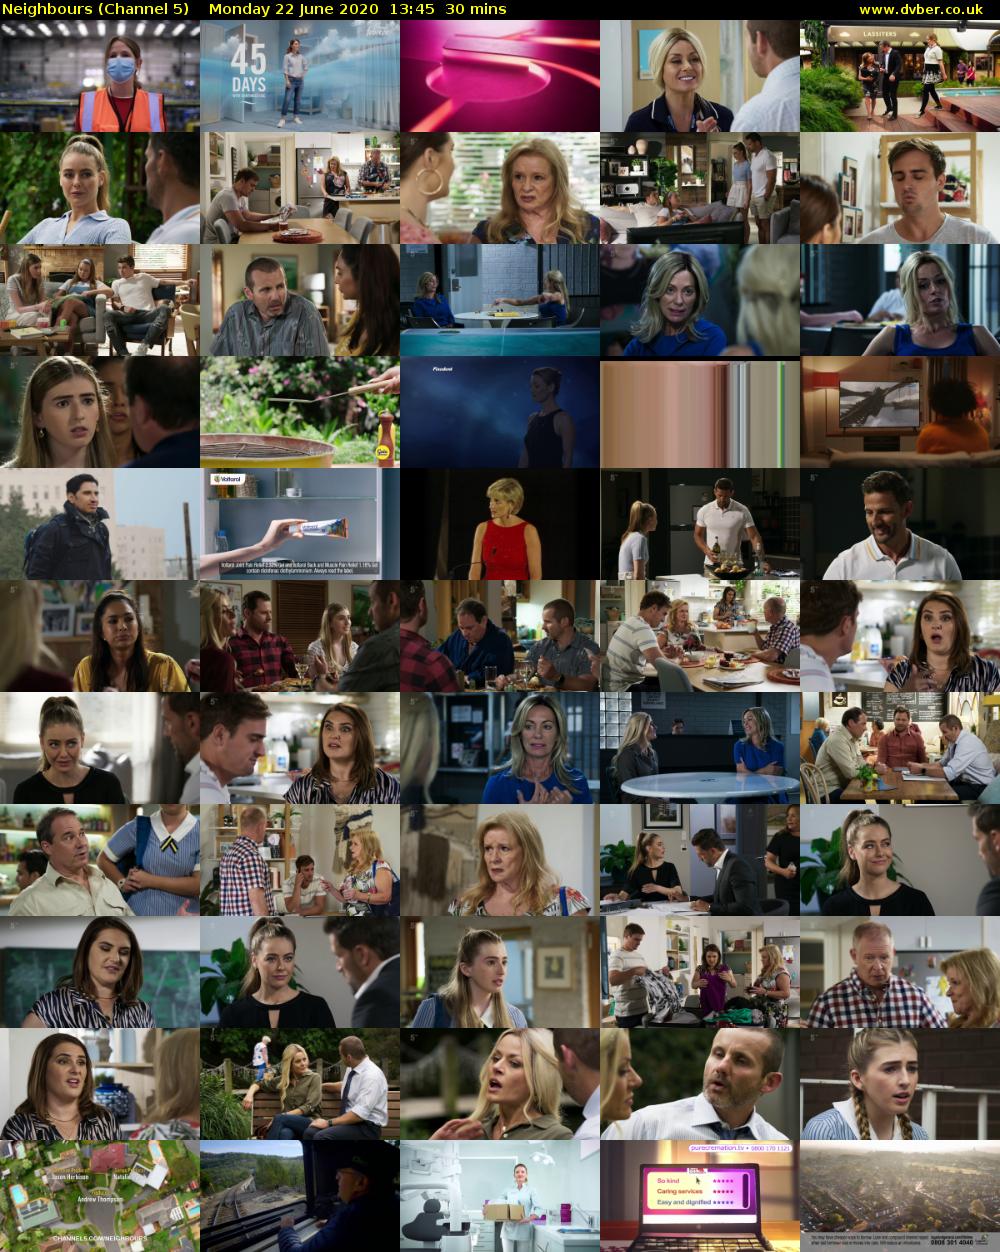 Neighbours (Channel 5) Monday 22 June 2020 13:45 - 14:15